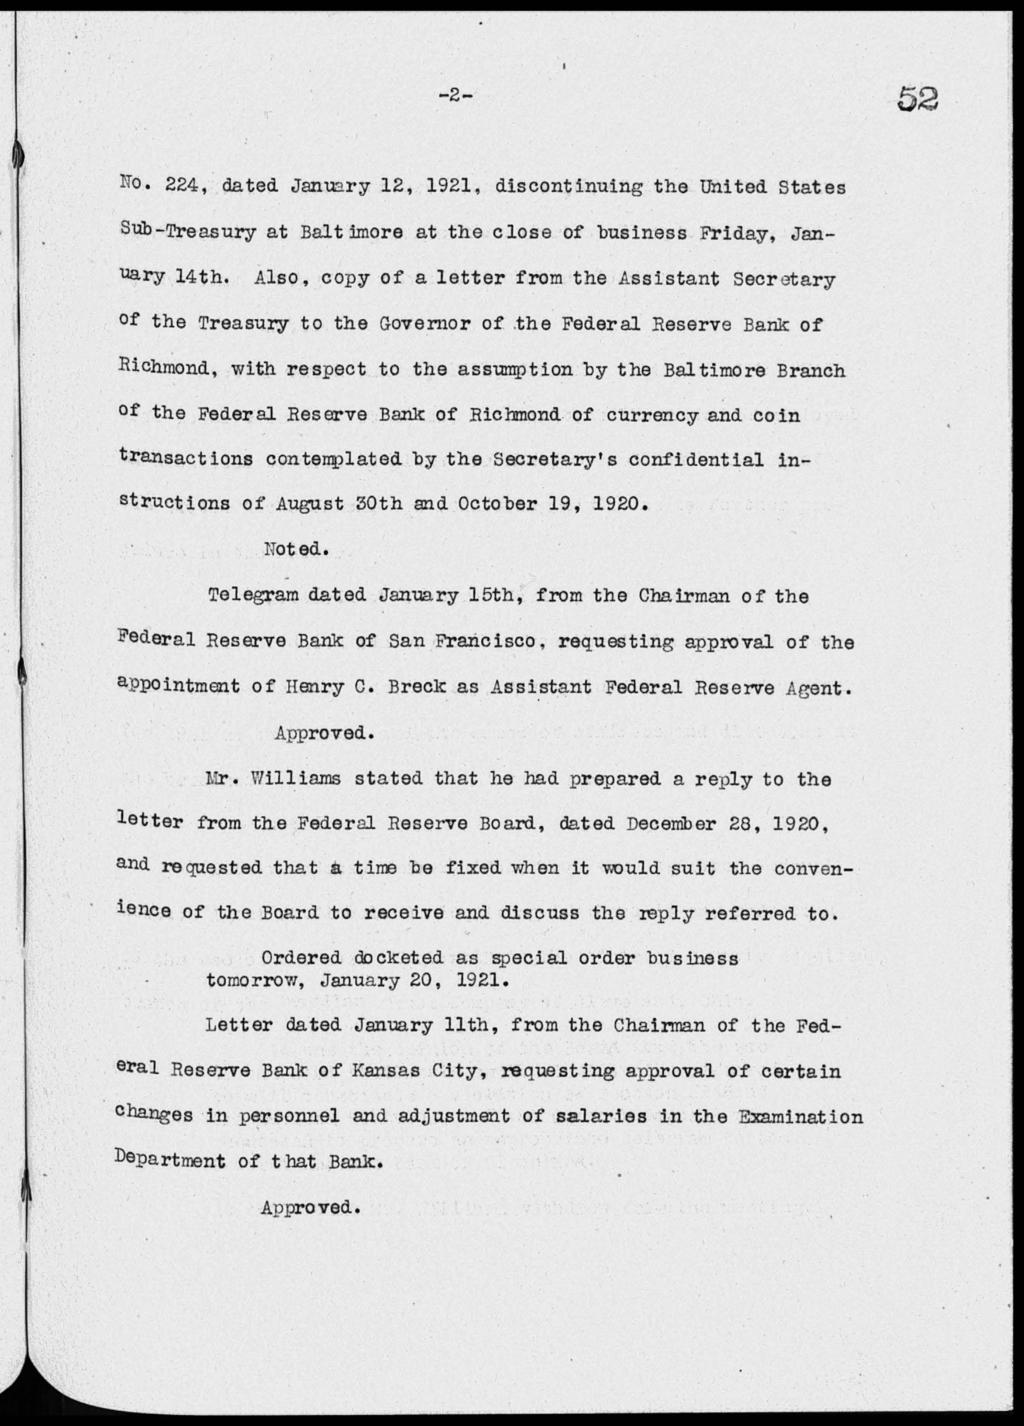 -2-52 22', dated January 12, 1921, discontinuing the United States Sub-Treasury at Baltimore at the close of business Friday, January 14th.